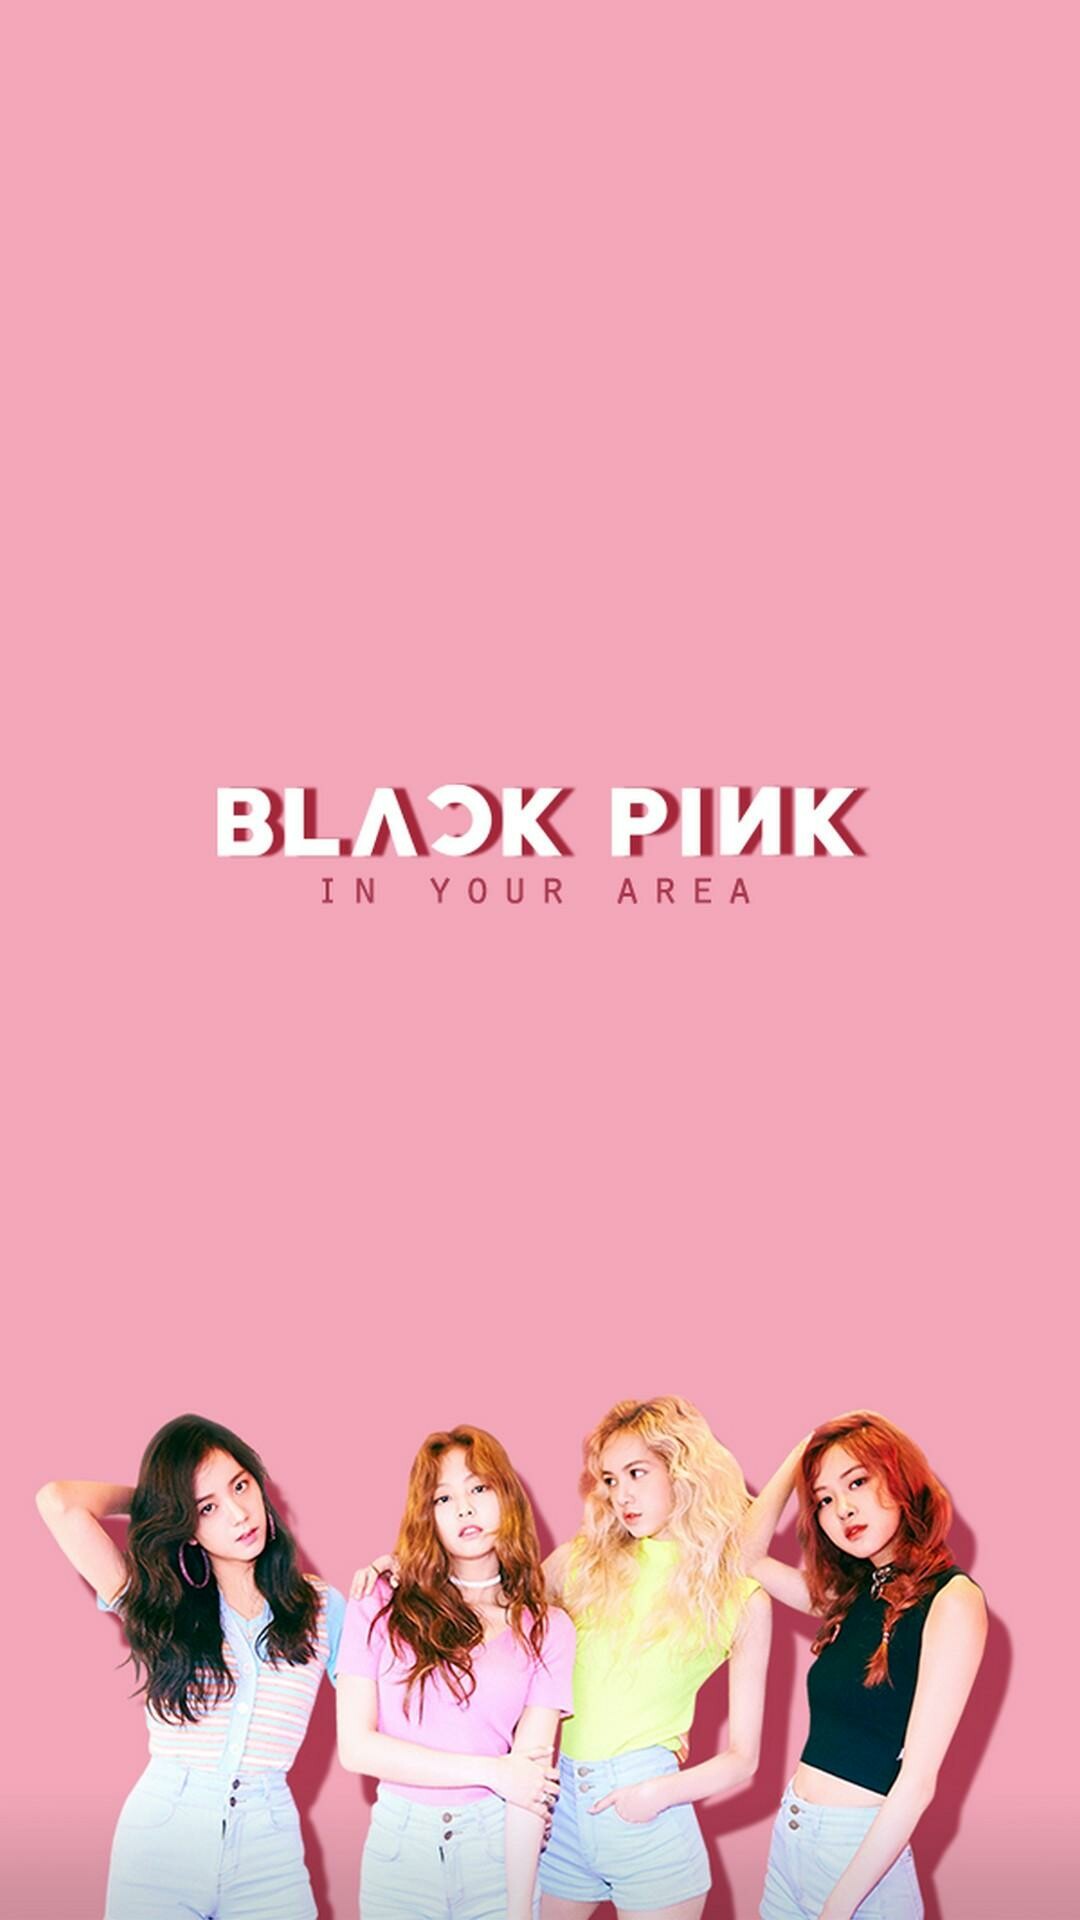 BLACKPINK: In your area, The band's first music show performance aired on August 14, 2016, on SBS's Inkigayo. 1080x1920 Full HD Background.